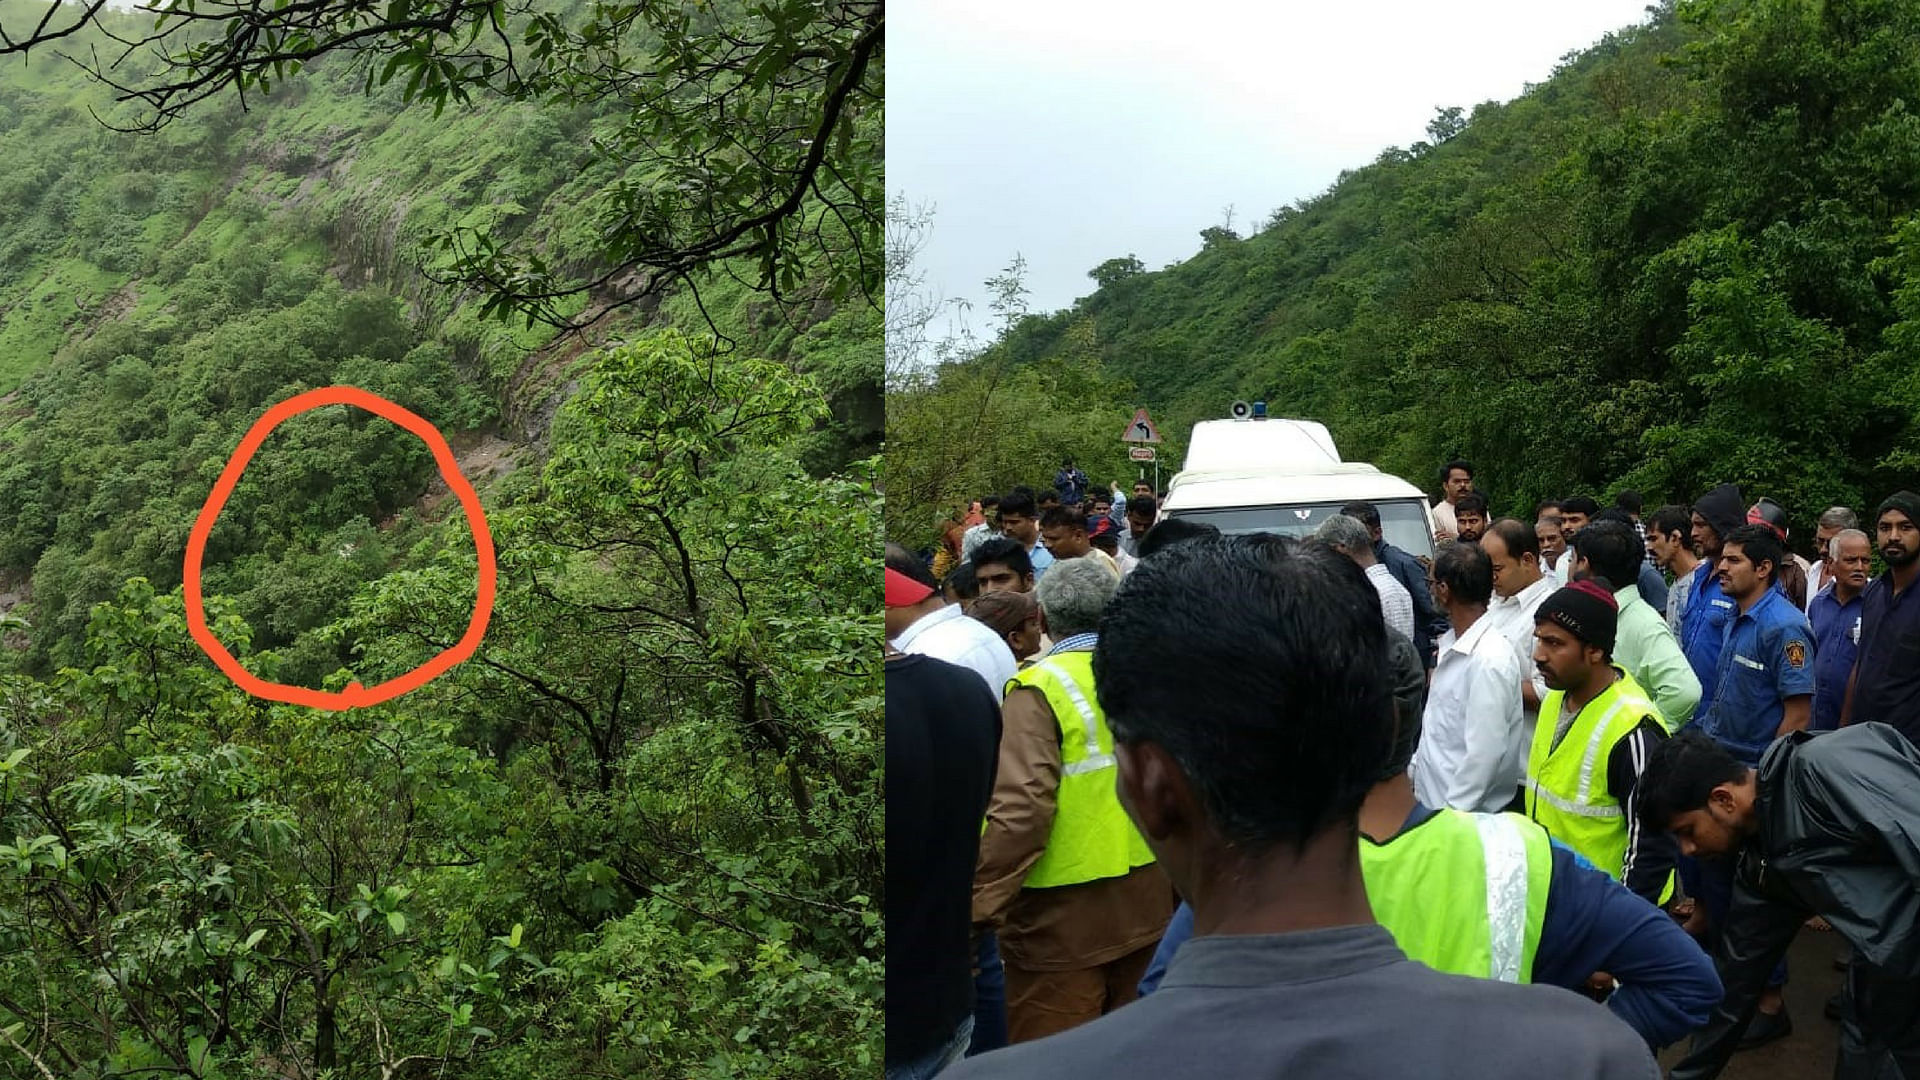 The bus carrying 35 passengers fell into a gorge.